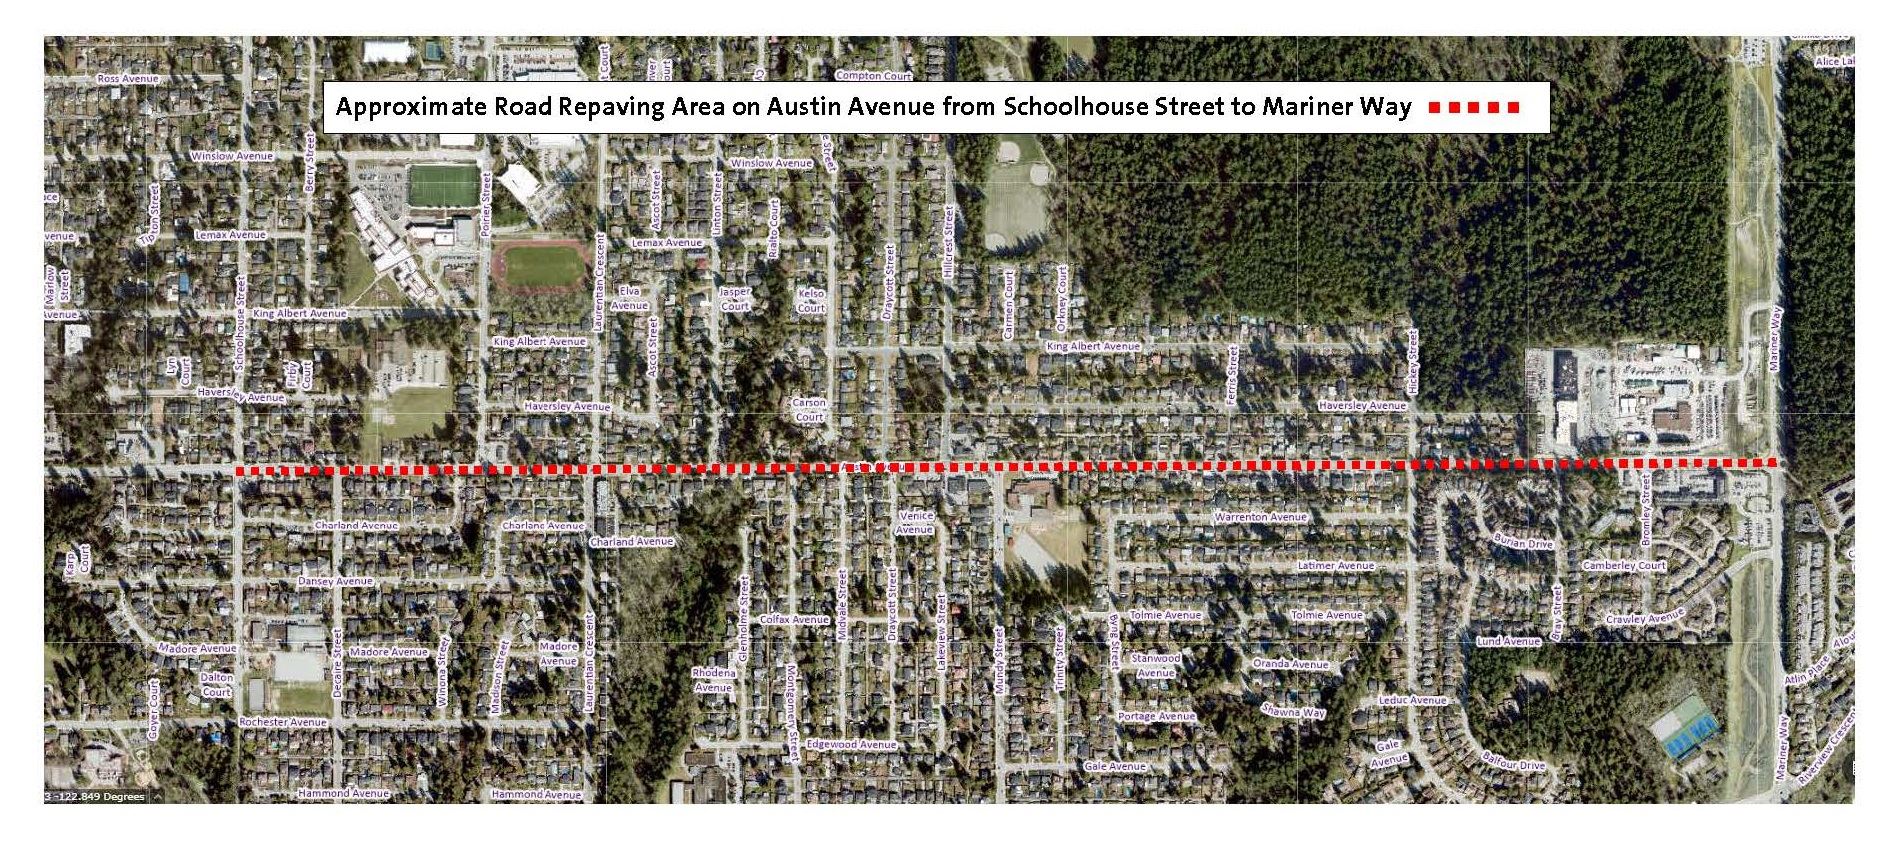 Location Map of Austin Road Repaving Area from Schoolhouse Street to Mariner Way